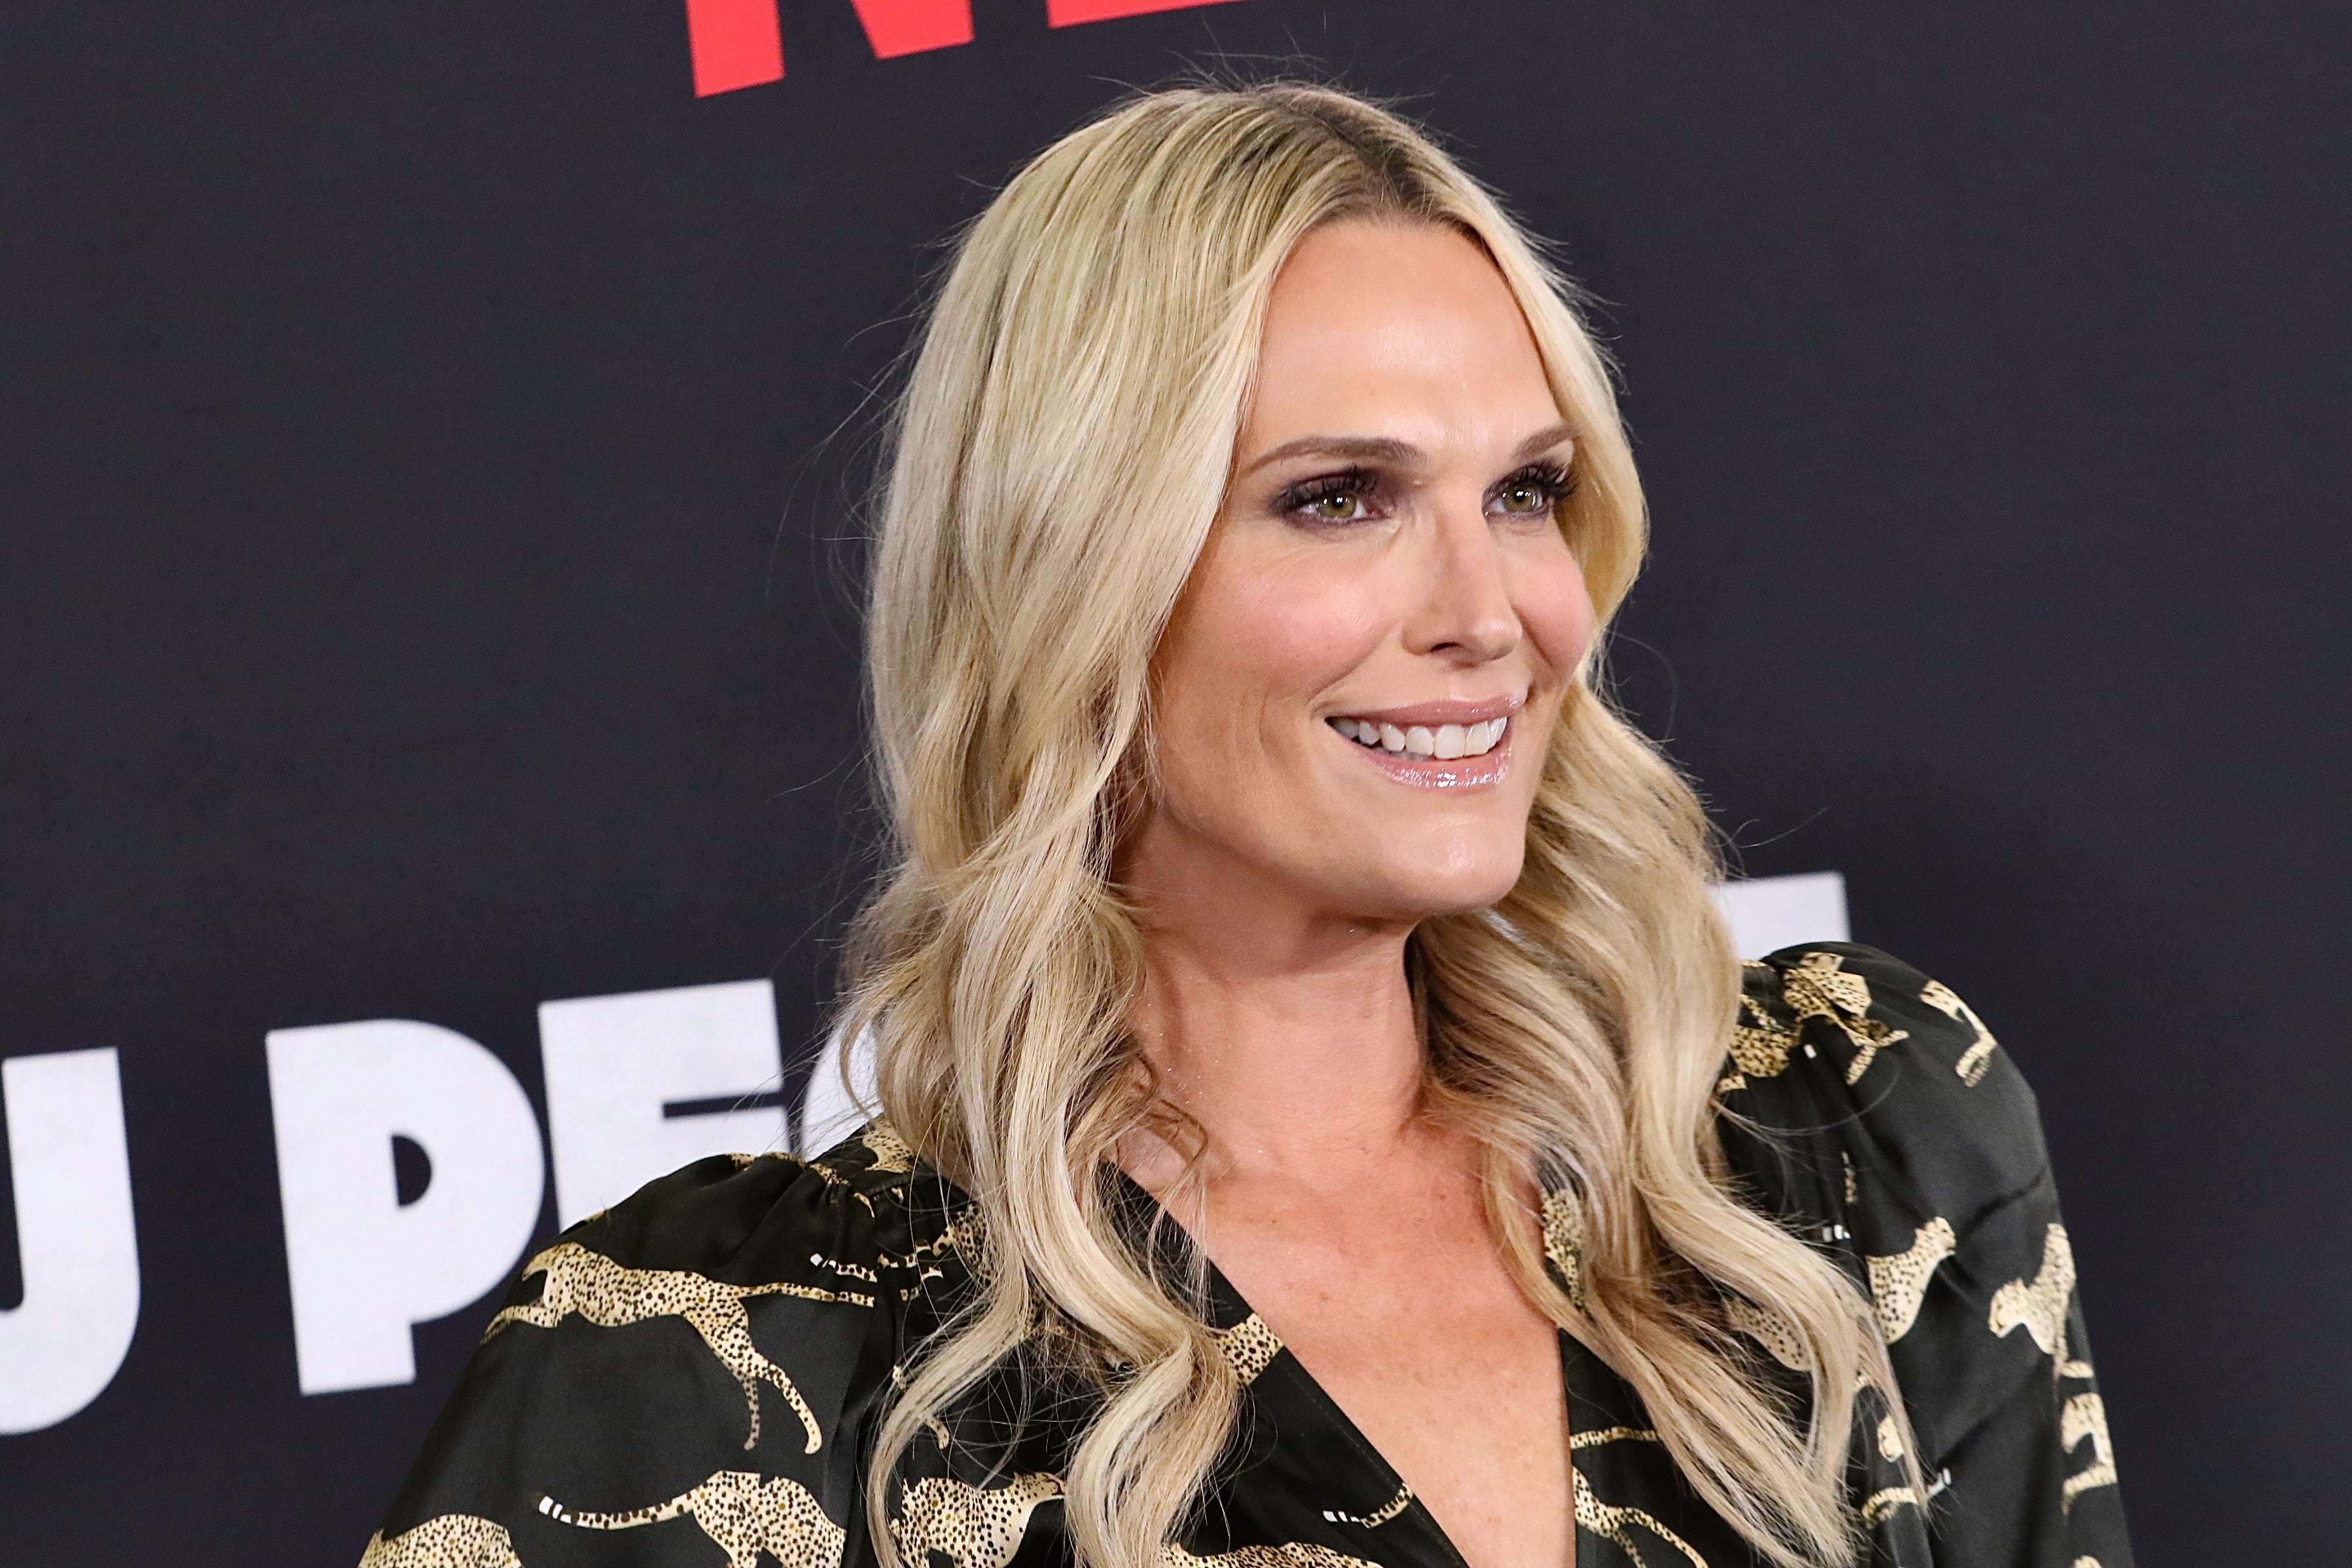 Molly Sims 'pretty much' starved herself after being told she was 'too fat' during modeling days